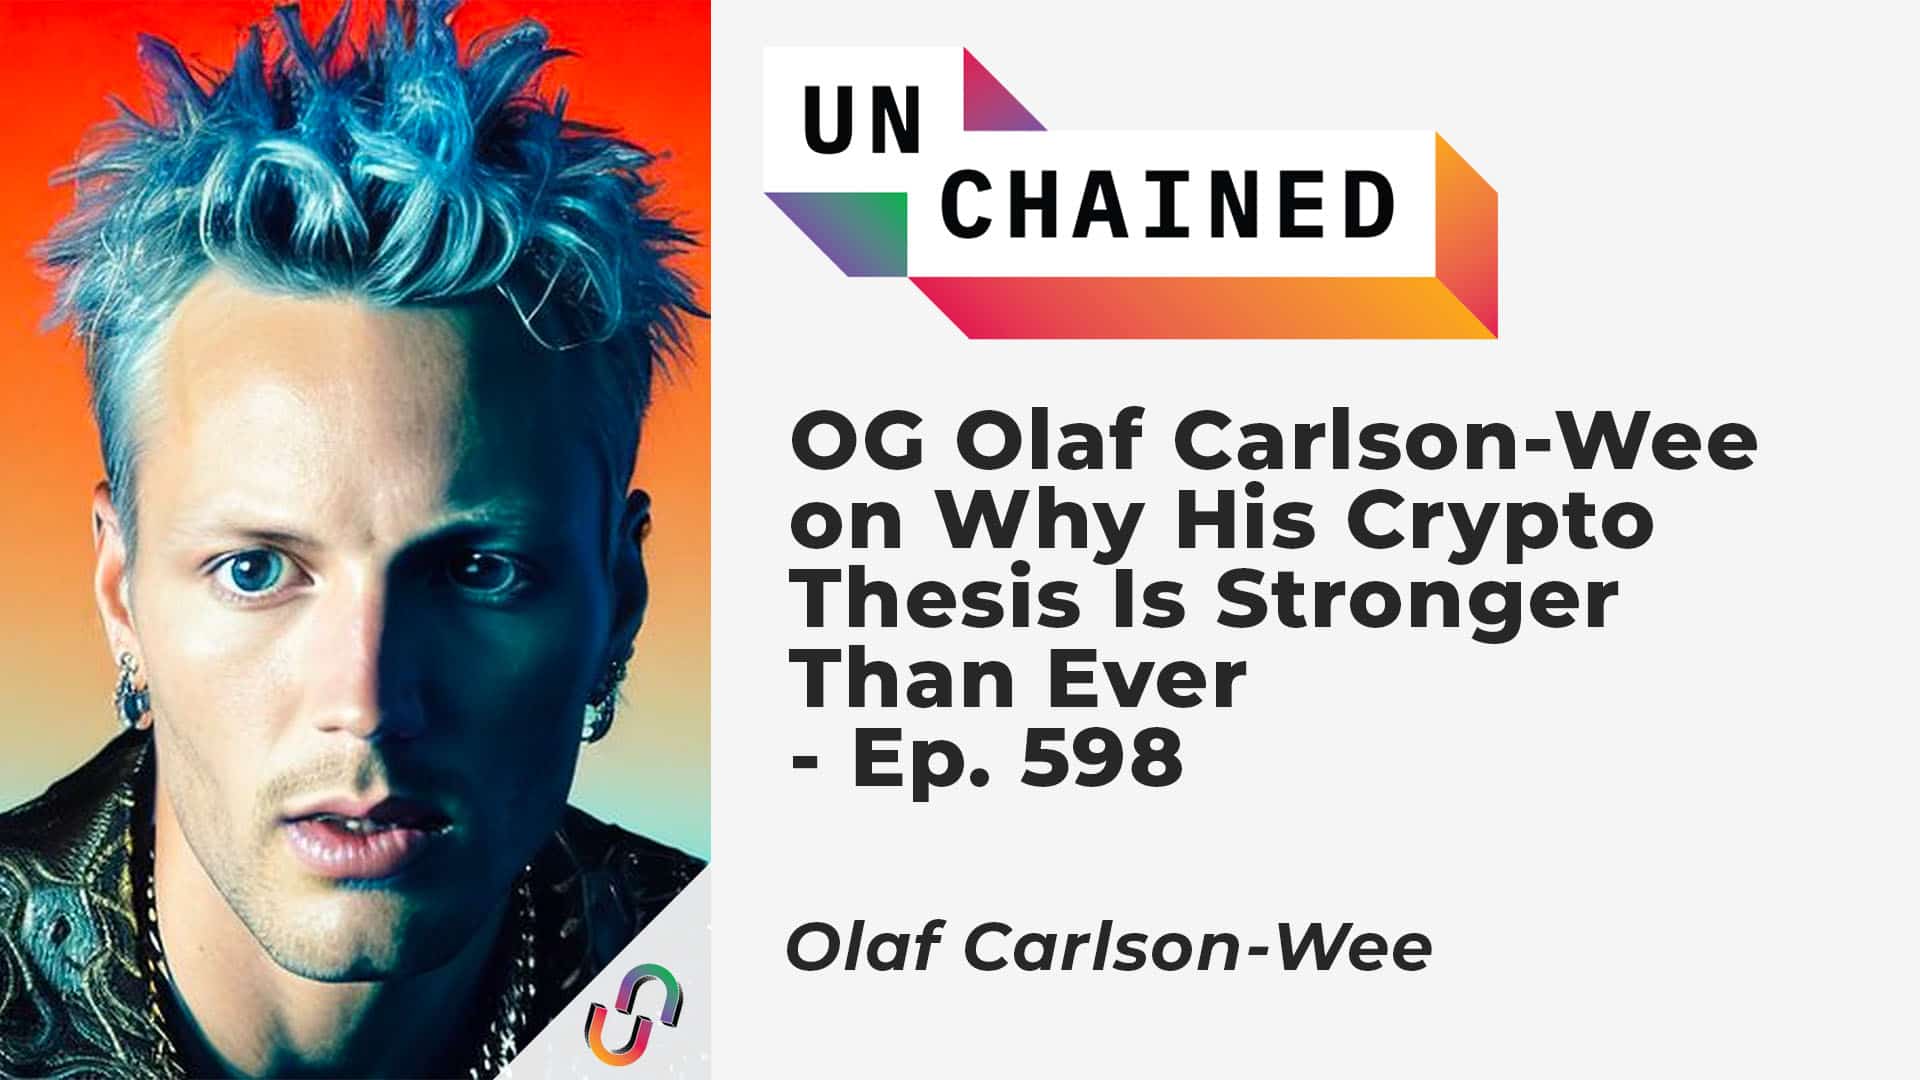 OG Olaf Carlson-Wee on Why His Crypto Thesis Is Stronger Than Ever - Ep. 598